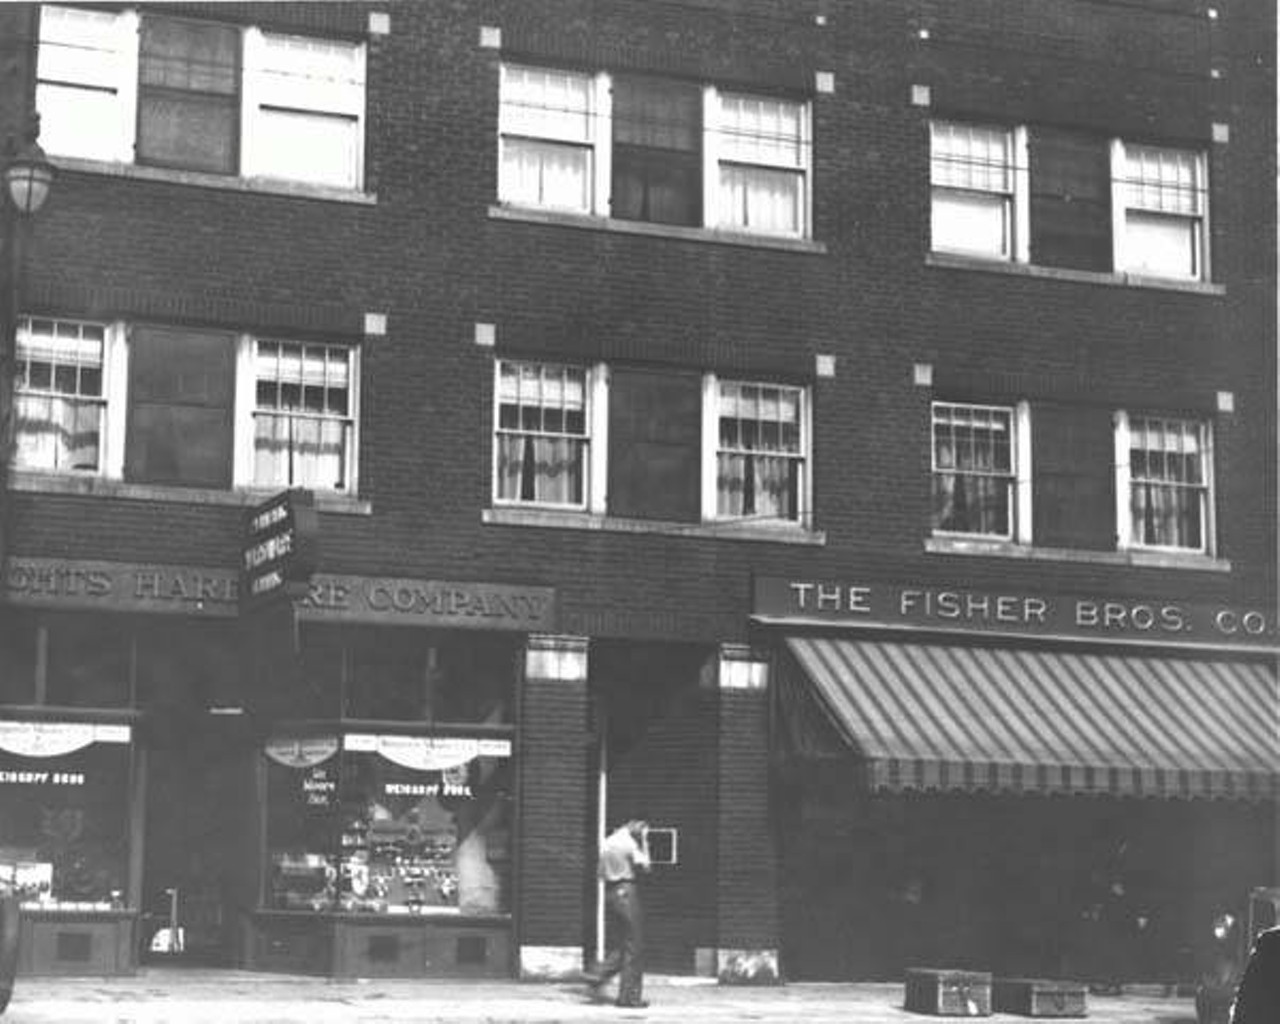  Heights Hardware Co. & The Fisher Bros. Co., 1926 